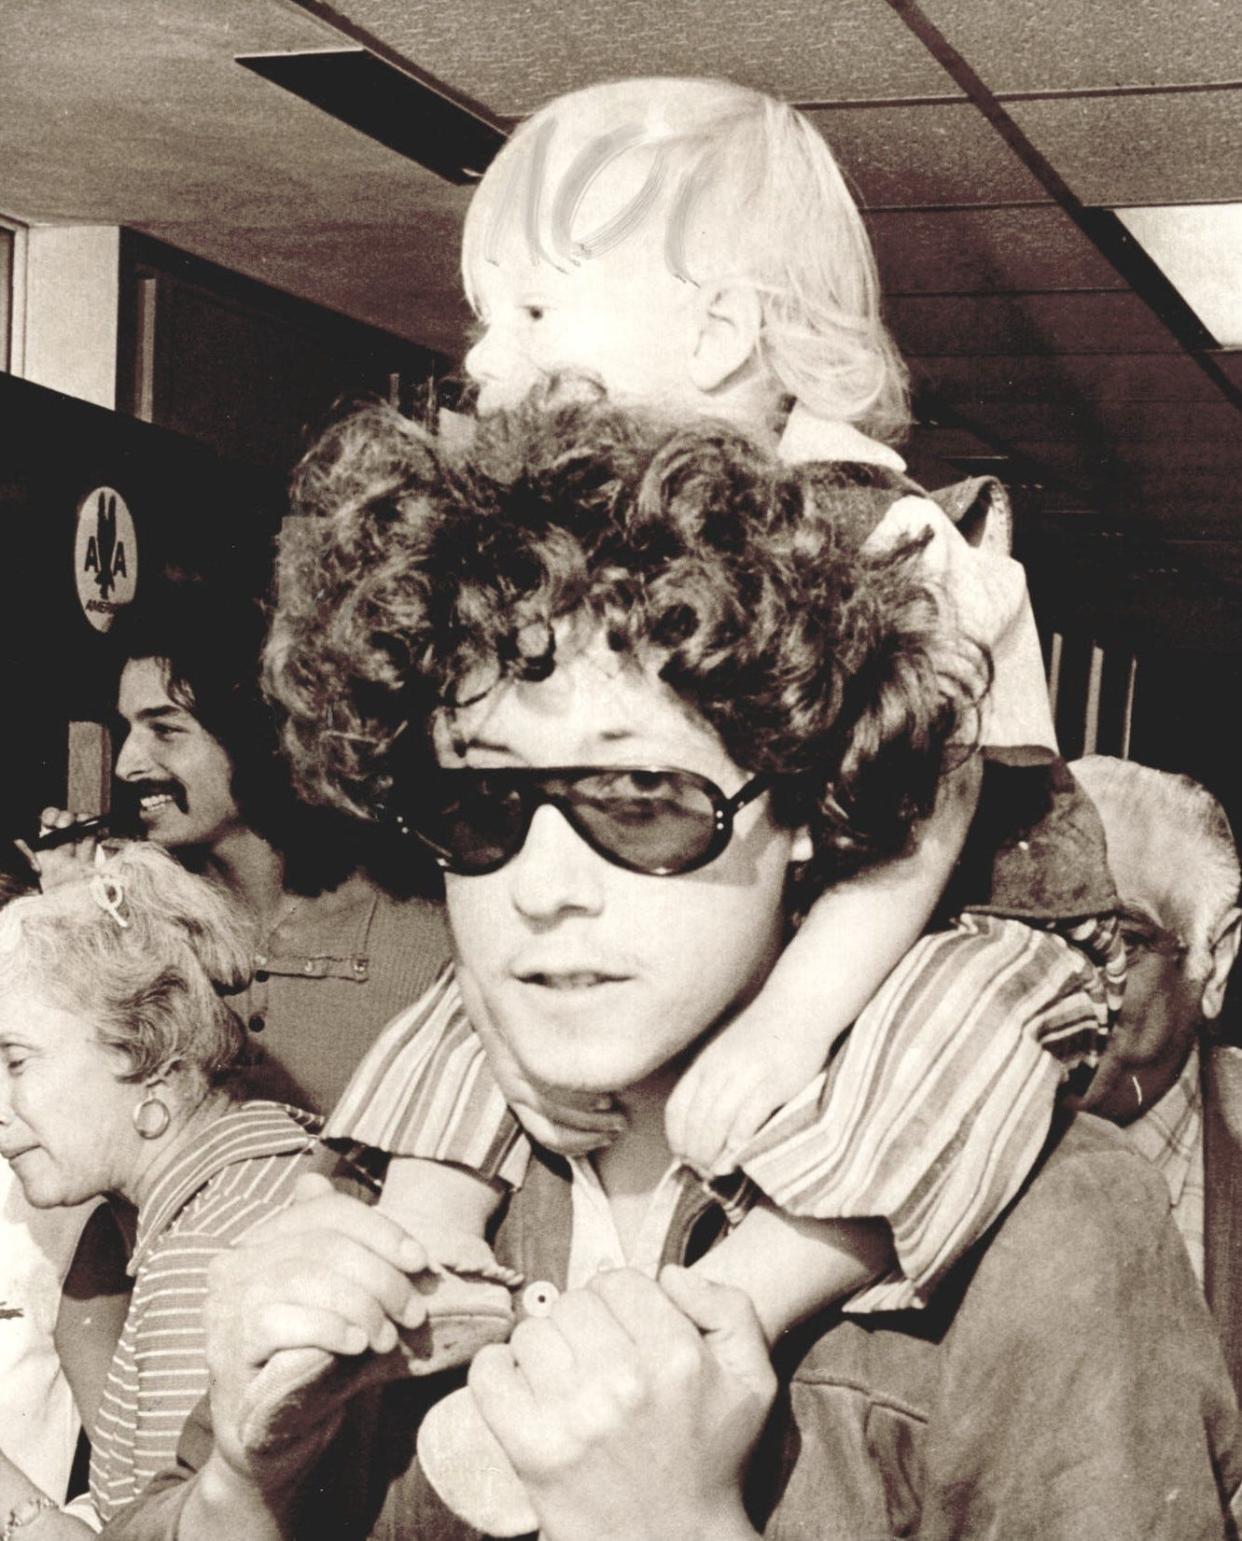 Woody Guthrie's son Arlo Guthrie carries his own son Abraham upon arrival in Oklahoma City. Arlo and his family were due to attend a benefit concert in Okemah in July 1971, where some were paying tribute to famed folk singer and songwriter Woody Guthrie, who died of Huntington's disease in 1967.